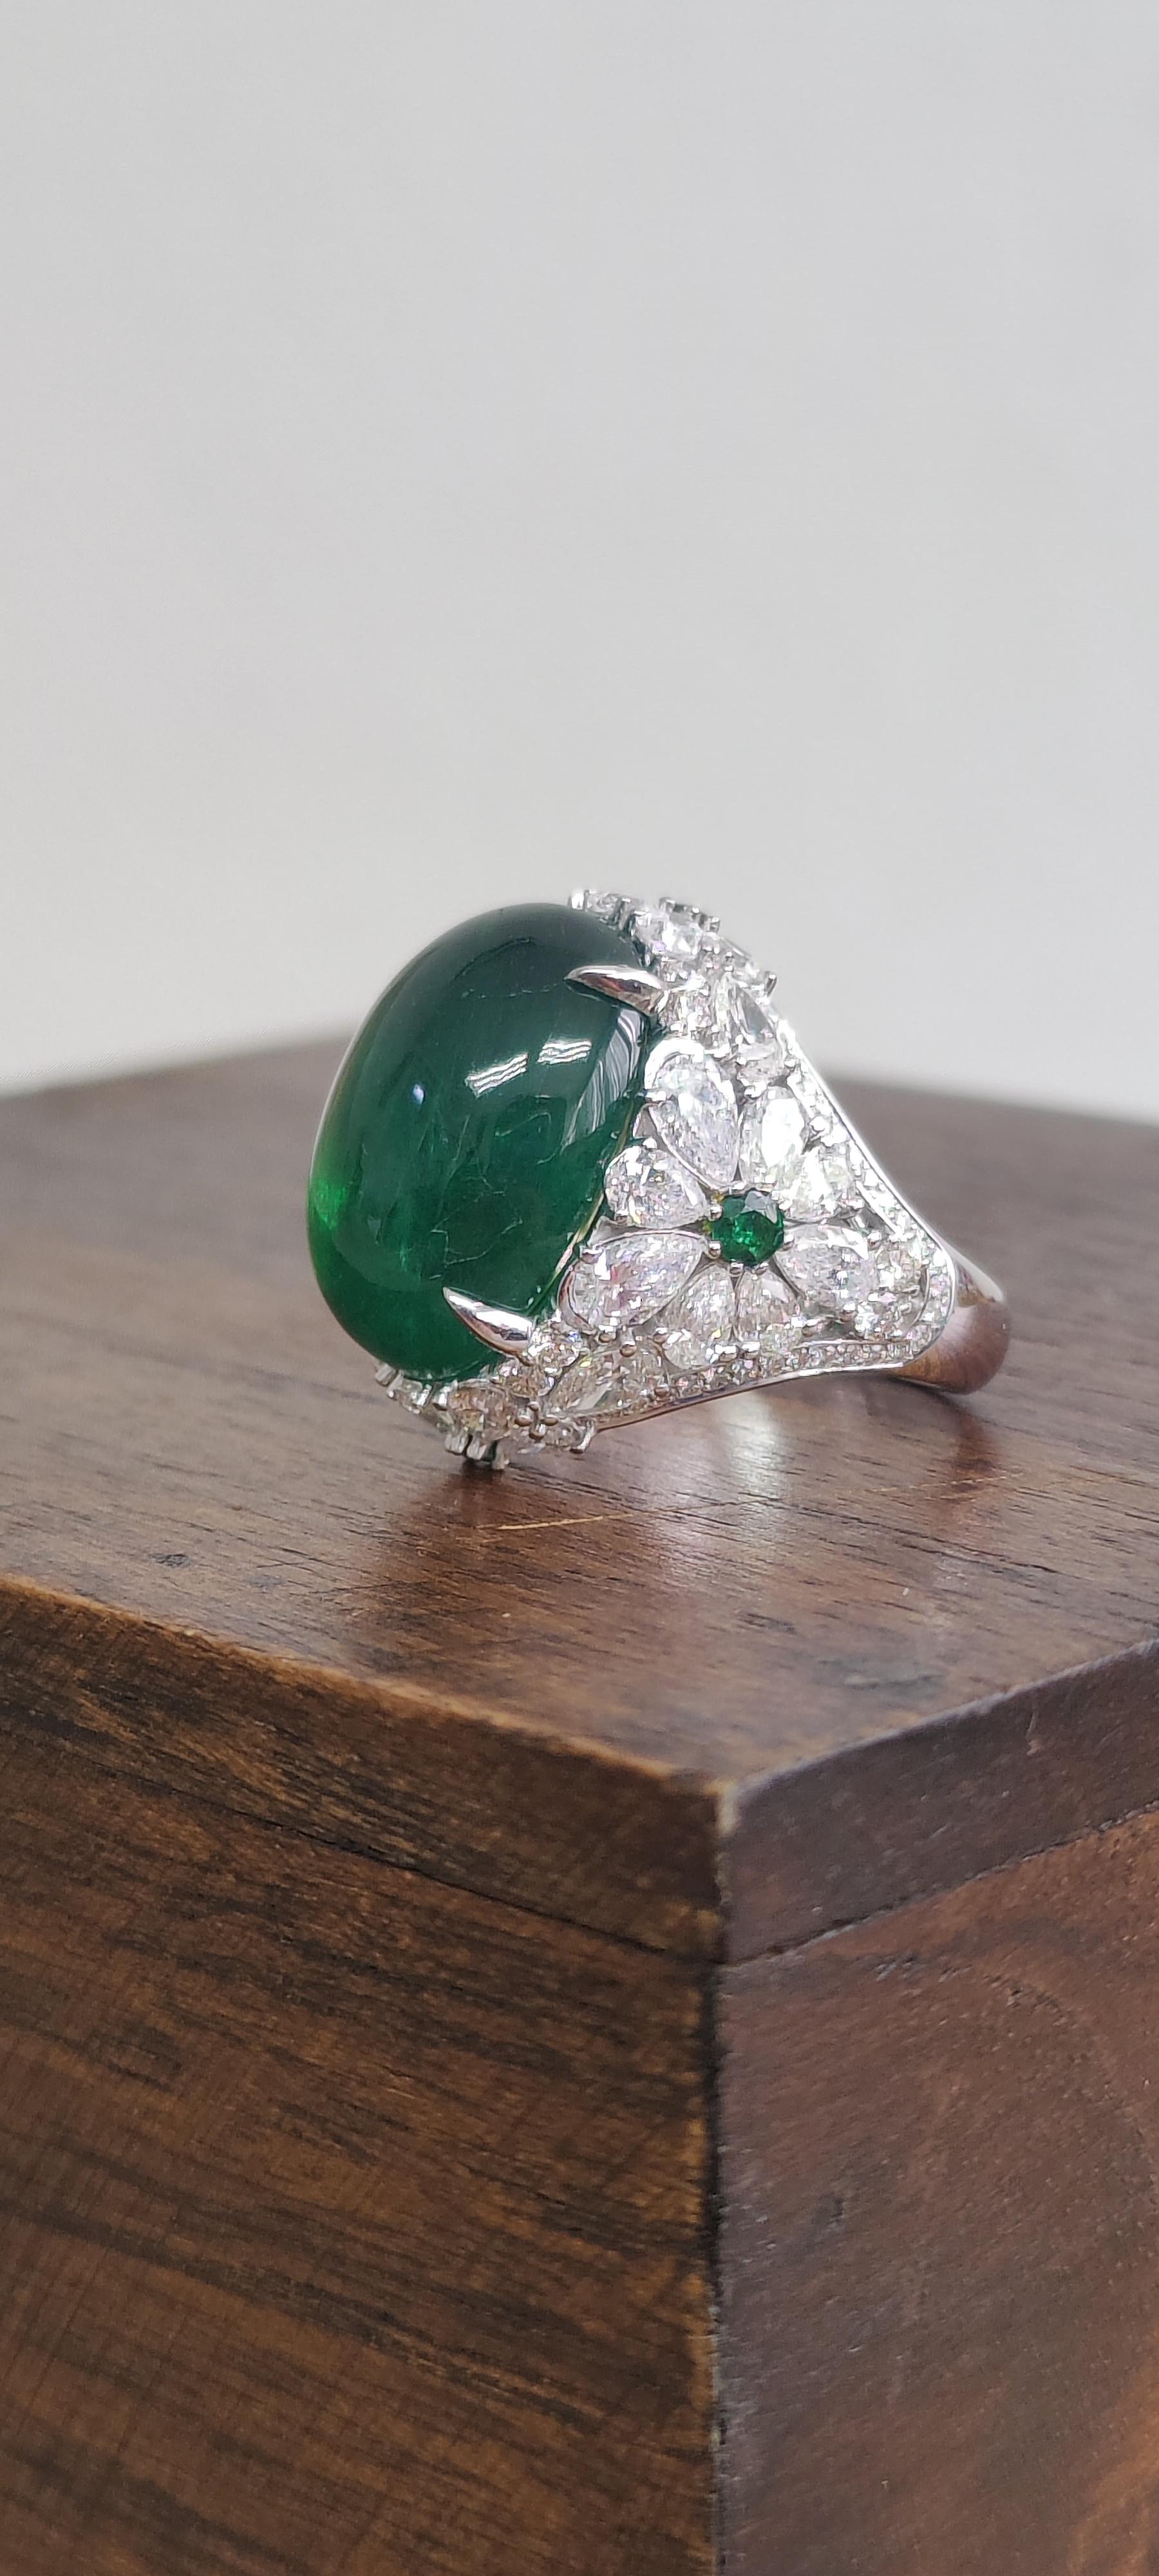 24.60 Carat Cabochon Emerald Art Deco Inspired One-of-a-kind Statement Ring For Sale 5